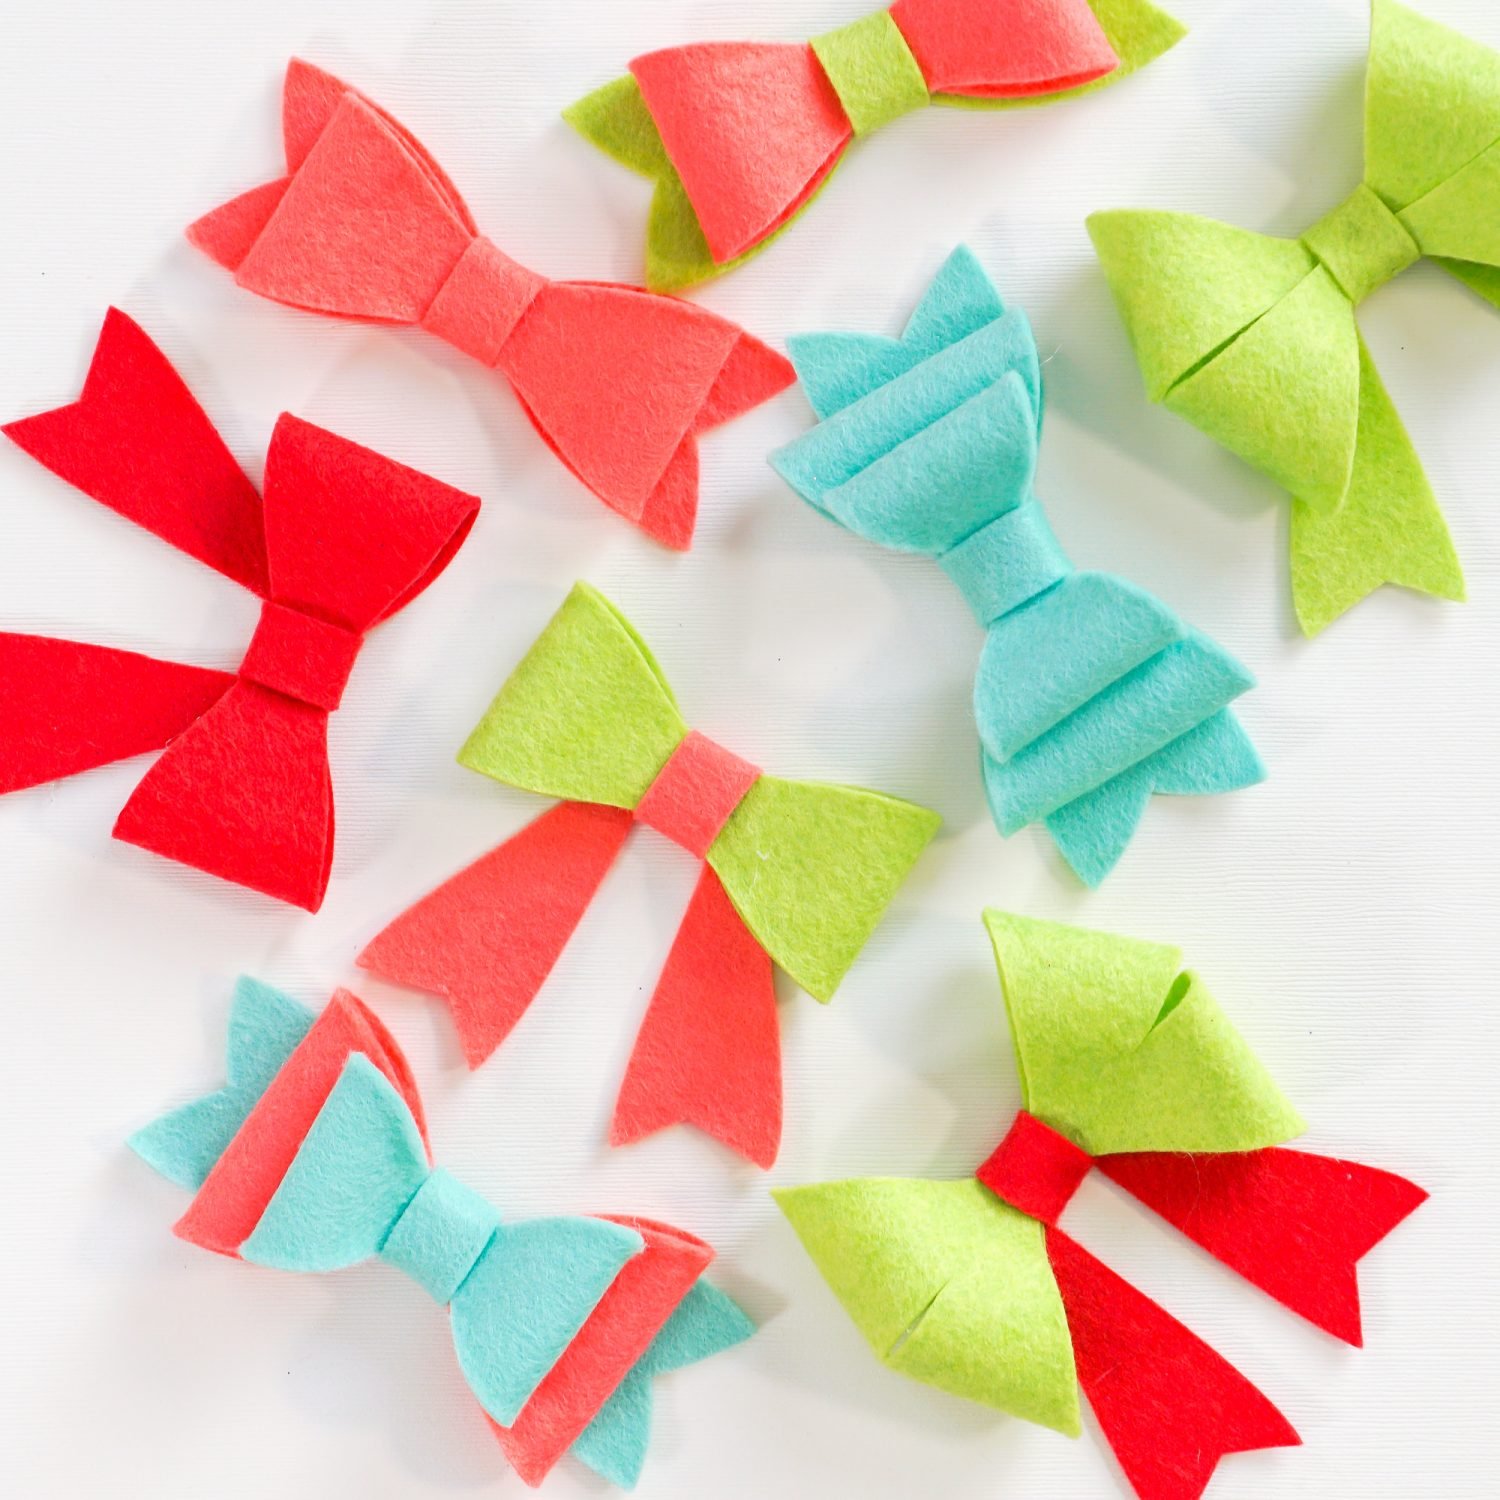 Assembled felt bows in holiday colors of red, green and aqua